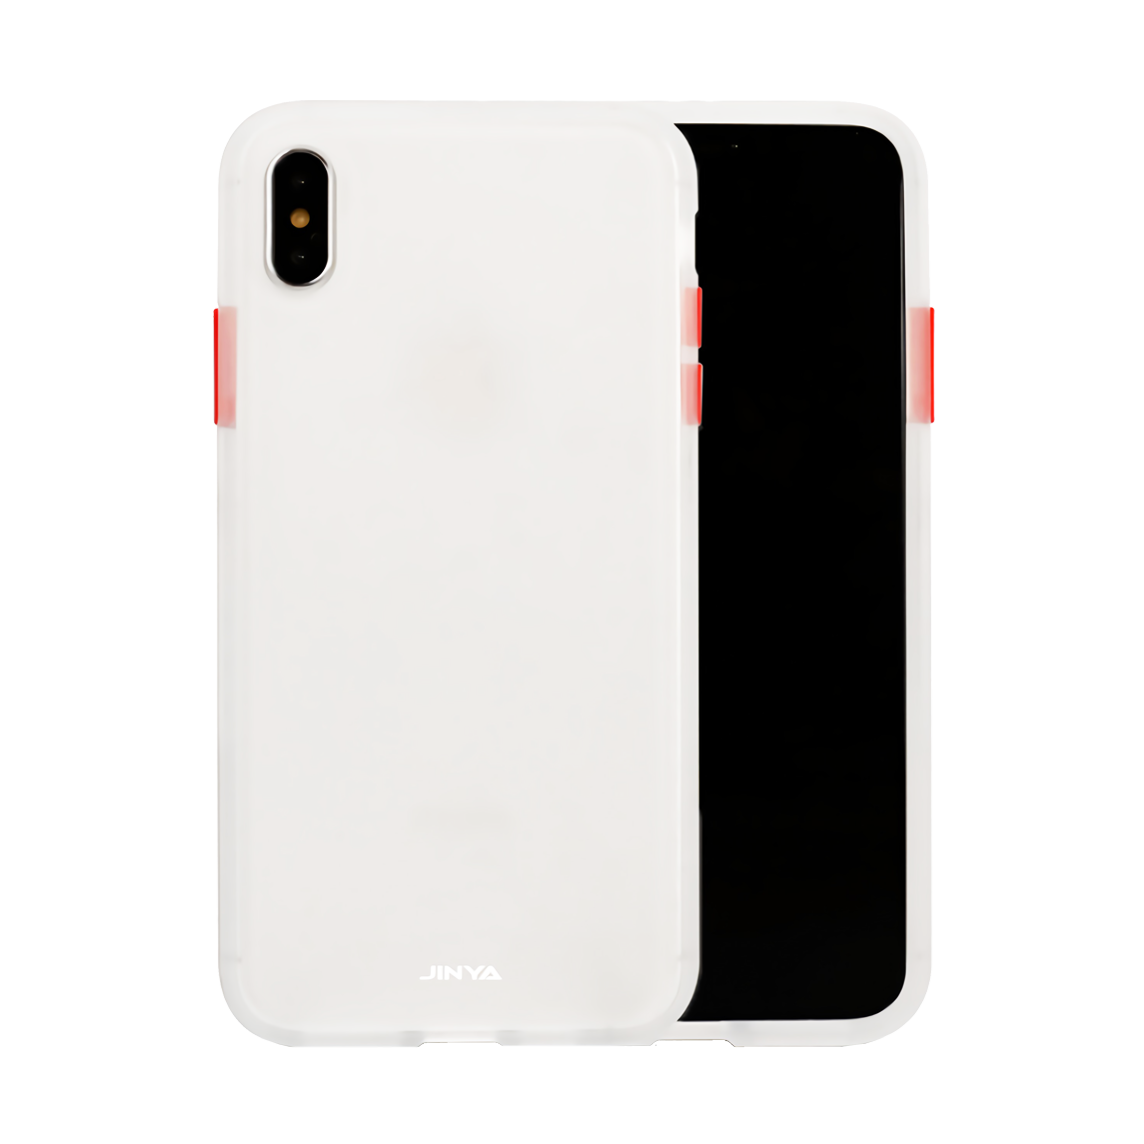 Jinya Sandy Pro Case for IPhone X and XS